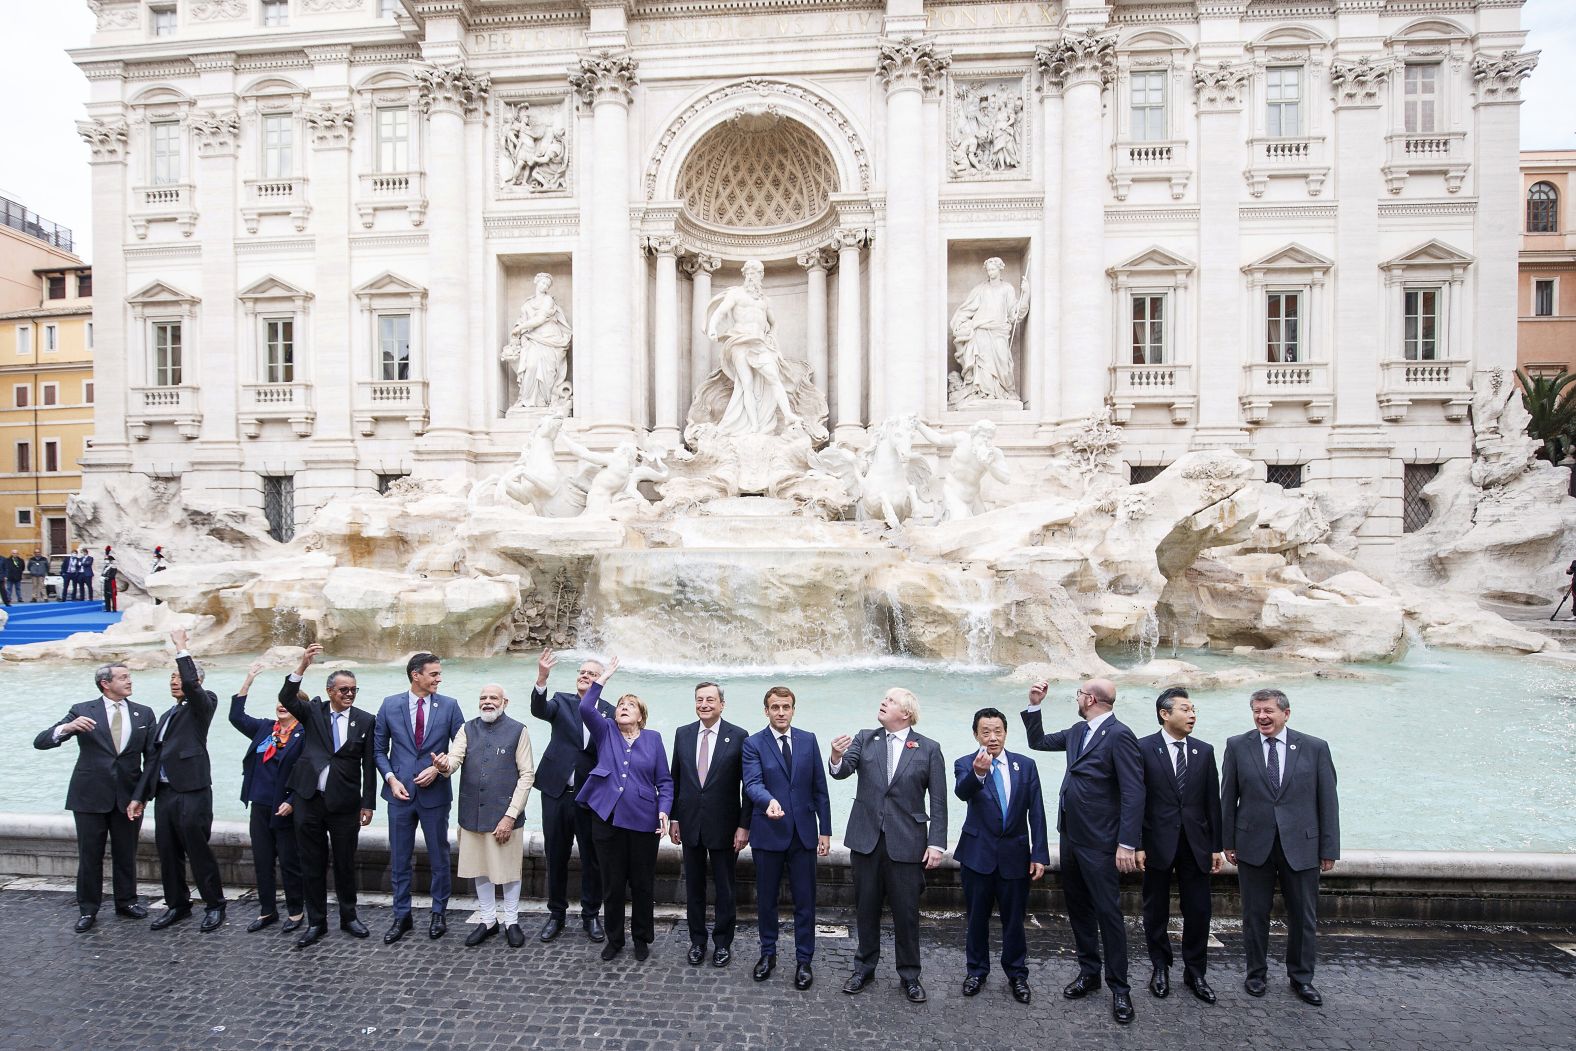 World leaders throw coins into the Trevi Fountain during the G20 summit on Sunday.